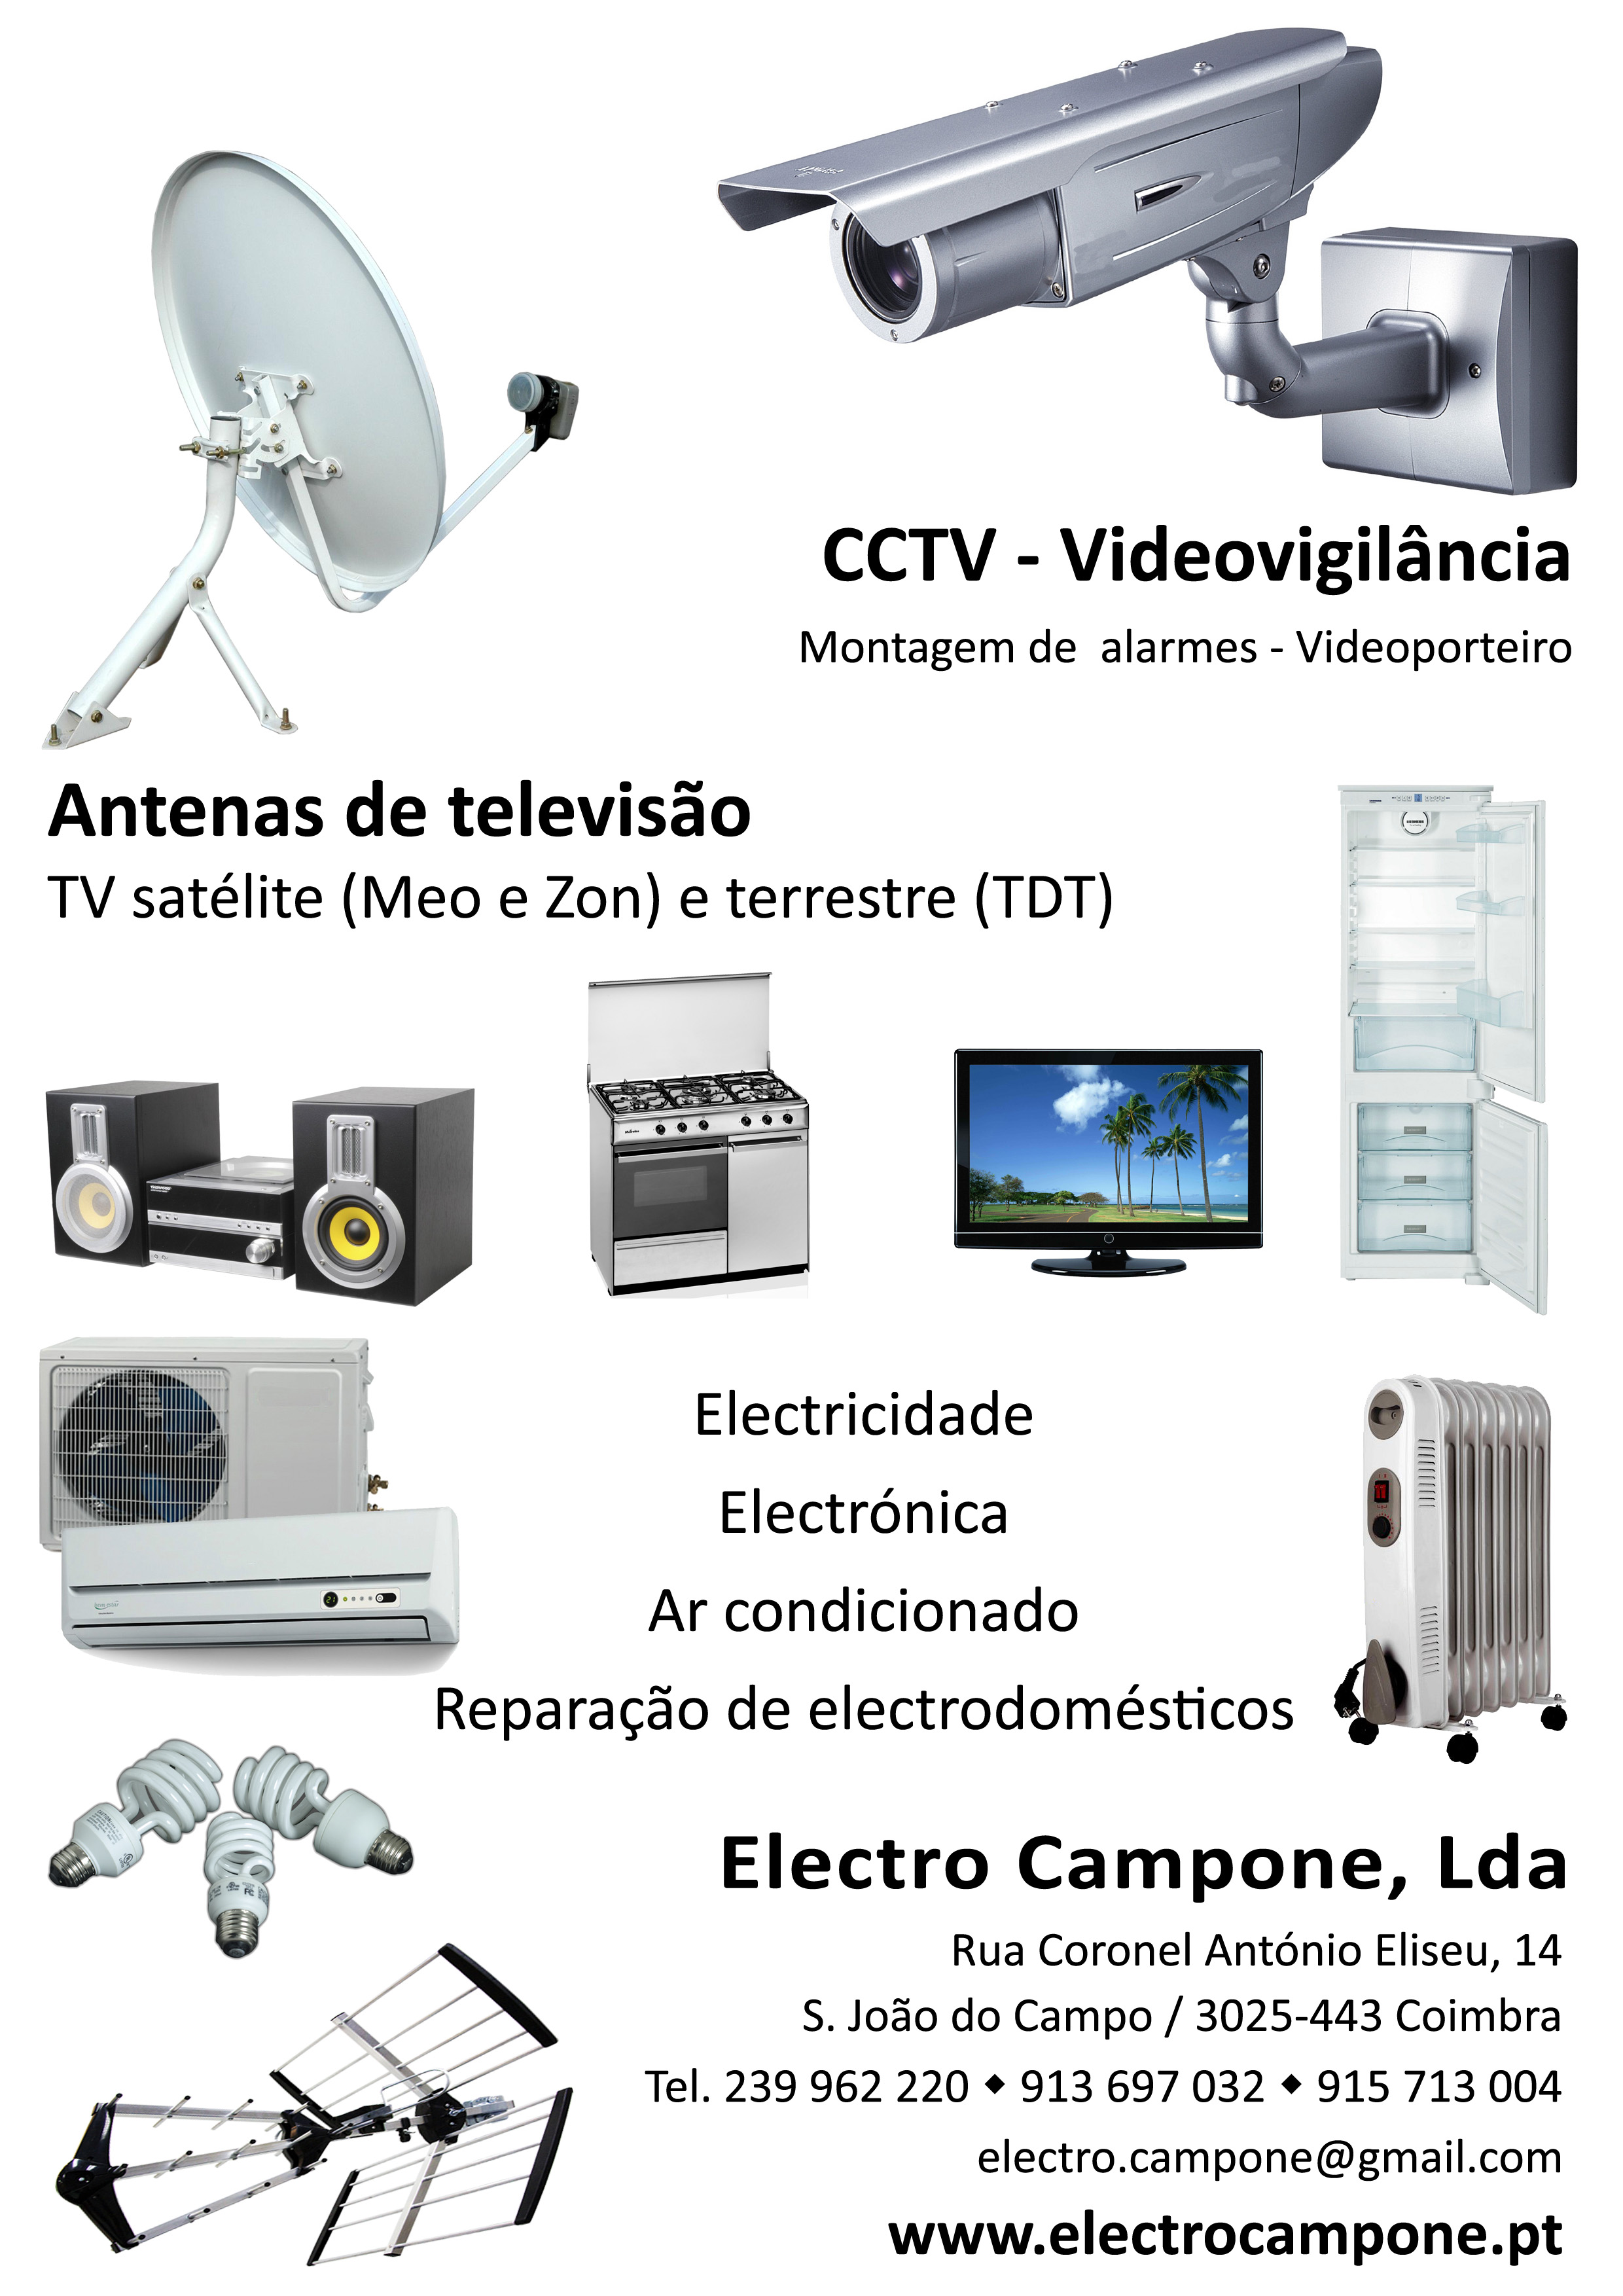 ElectroCampone